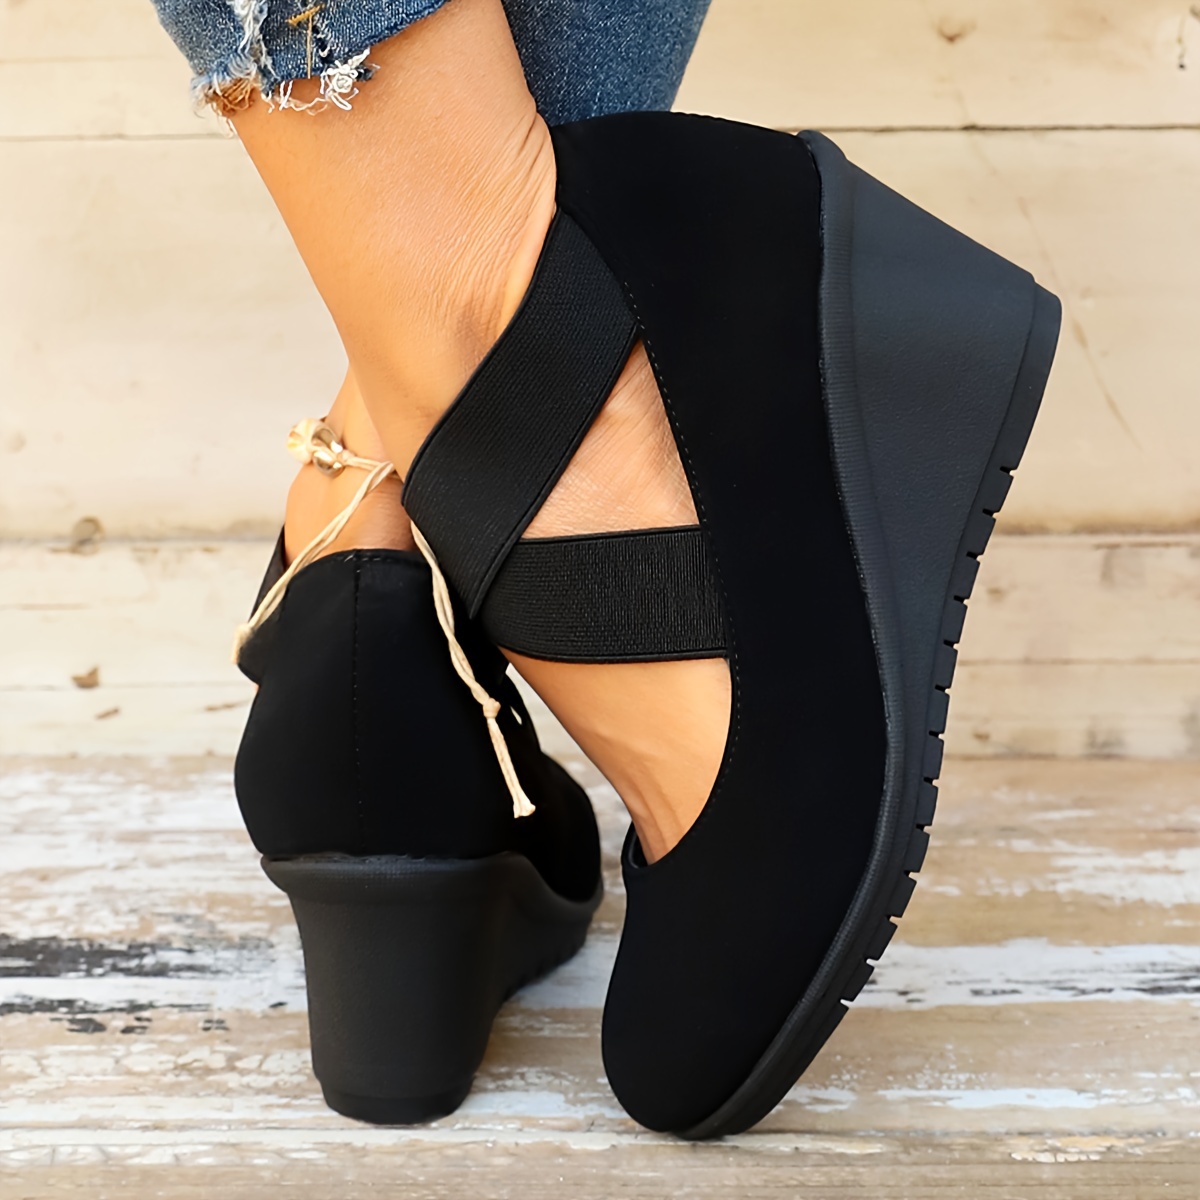 

Women's Comfy Wedge Shoes, Black Crisscross Elastic Strap Slip On Shoes, Casual Versatile Shoes For Daily Wear